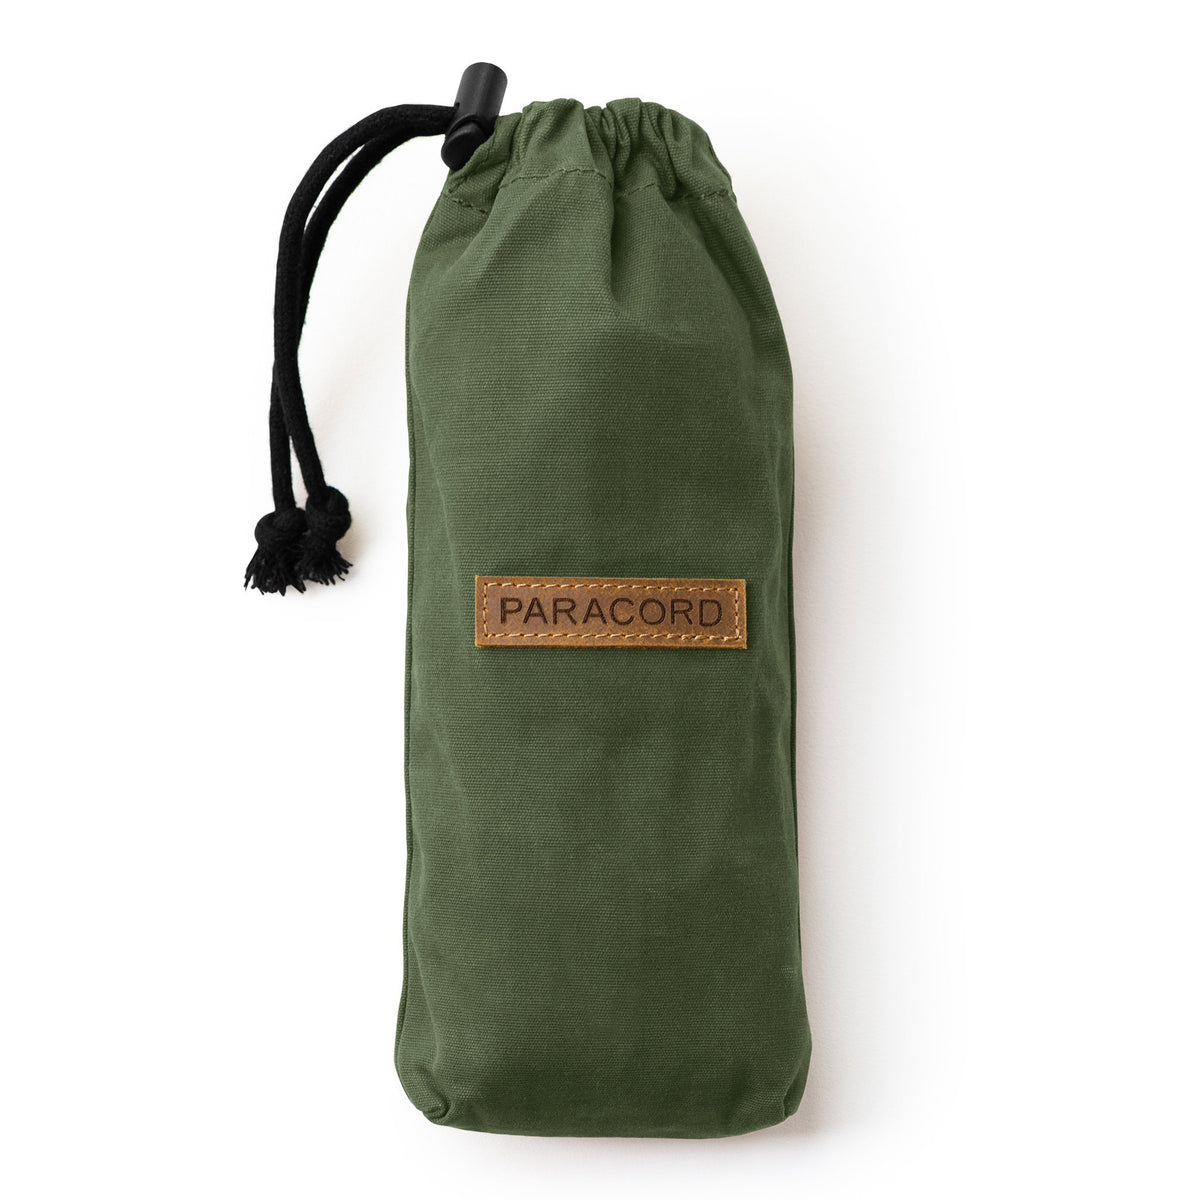 Canvas Bushcraft Bag for Paracord Container TACAMO Olive-Drab 